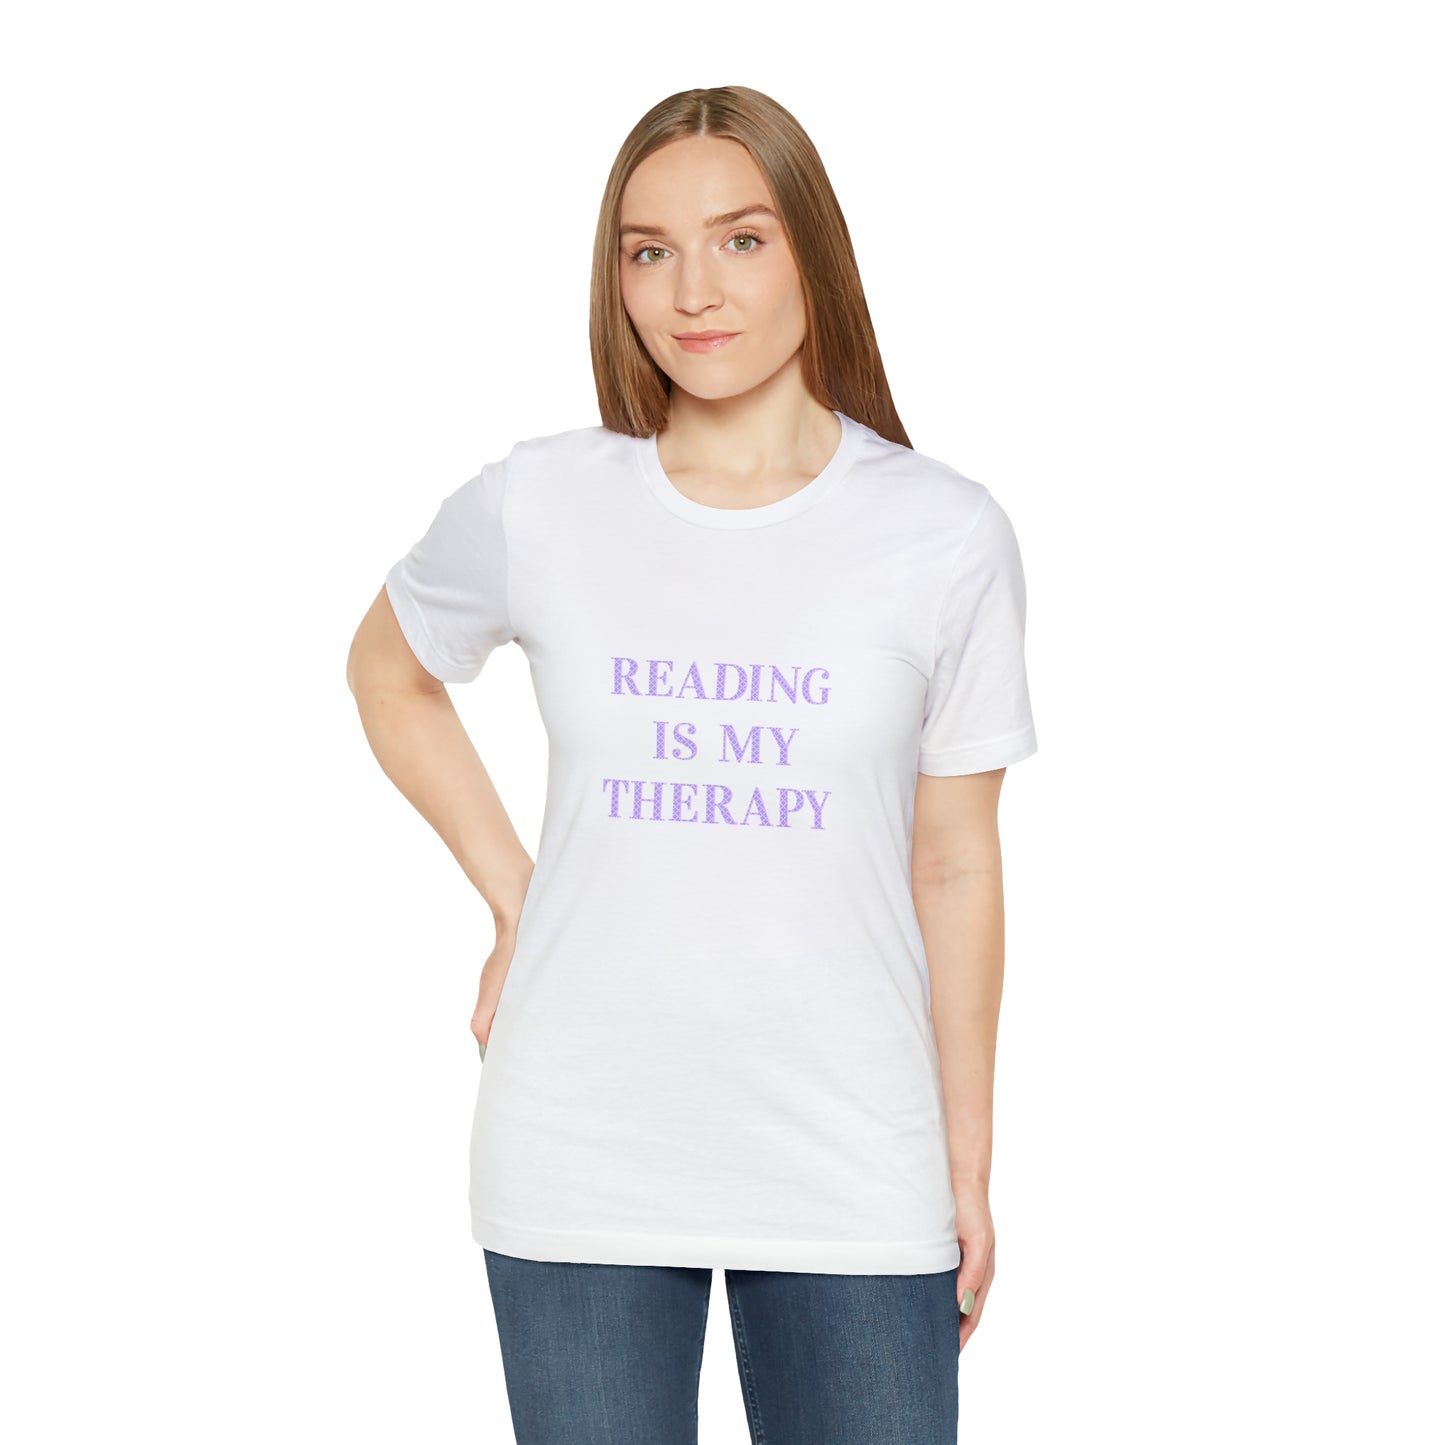 Hobby, Reading Is My Therapy, Books- Adult, Regular Fit, Soft Cotton, Smaller Size Image T-Shirt